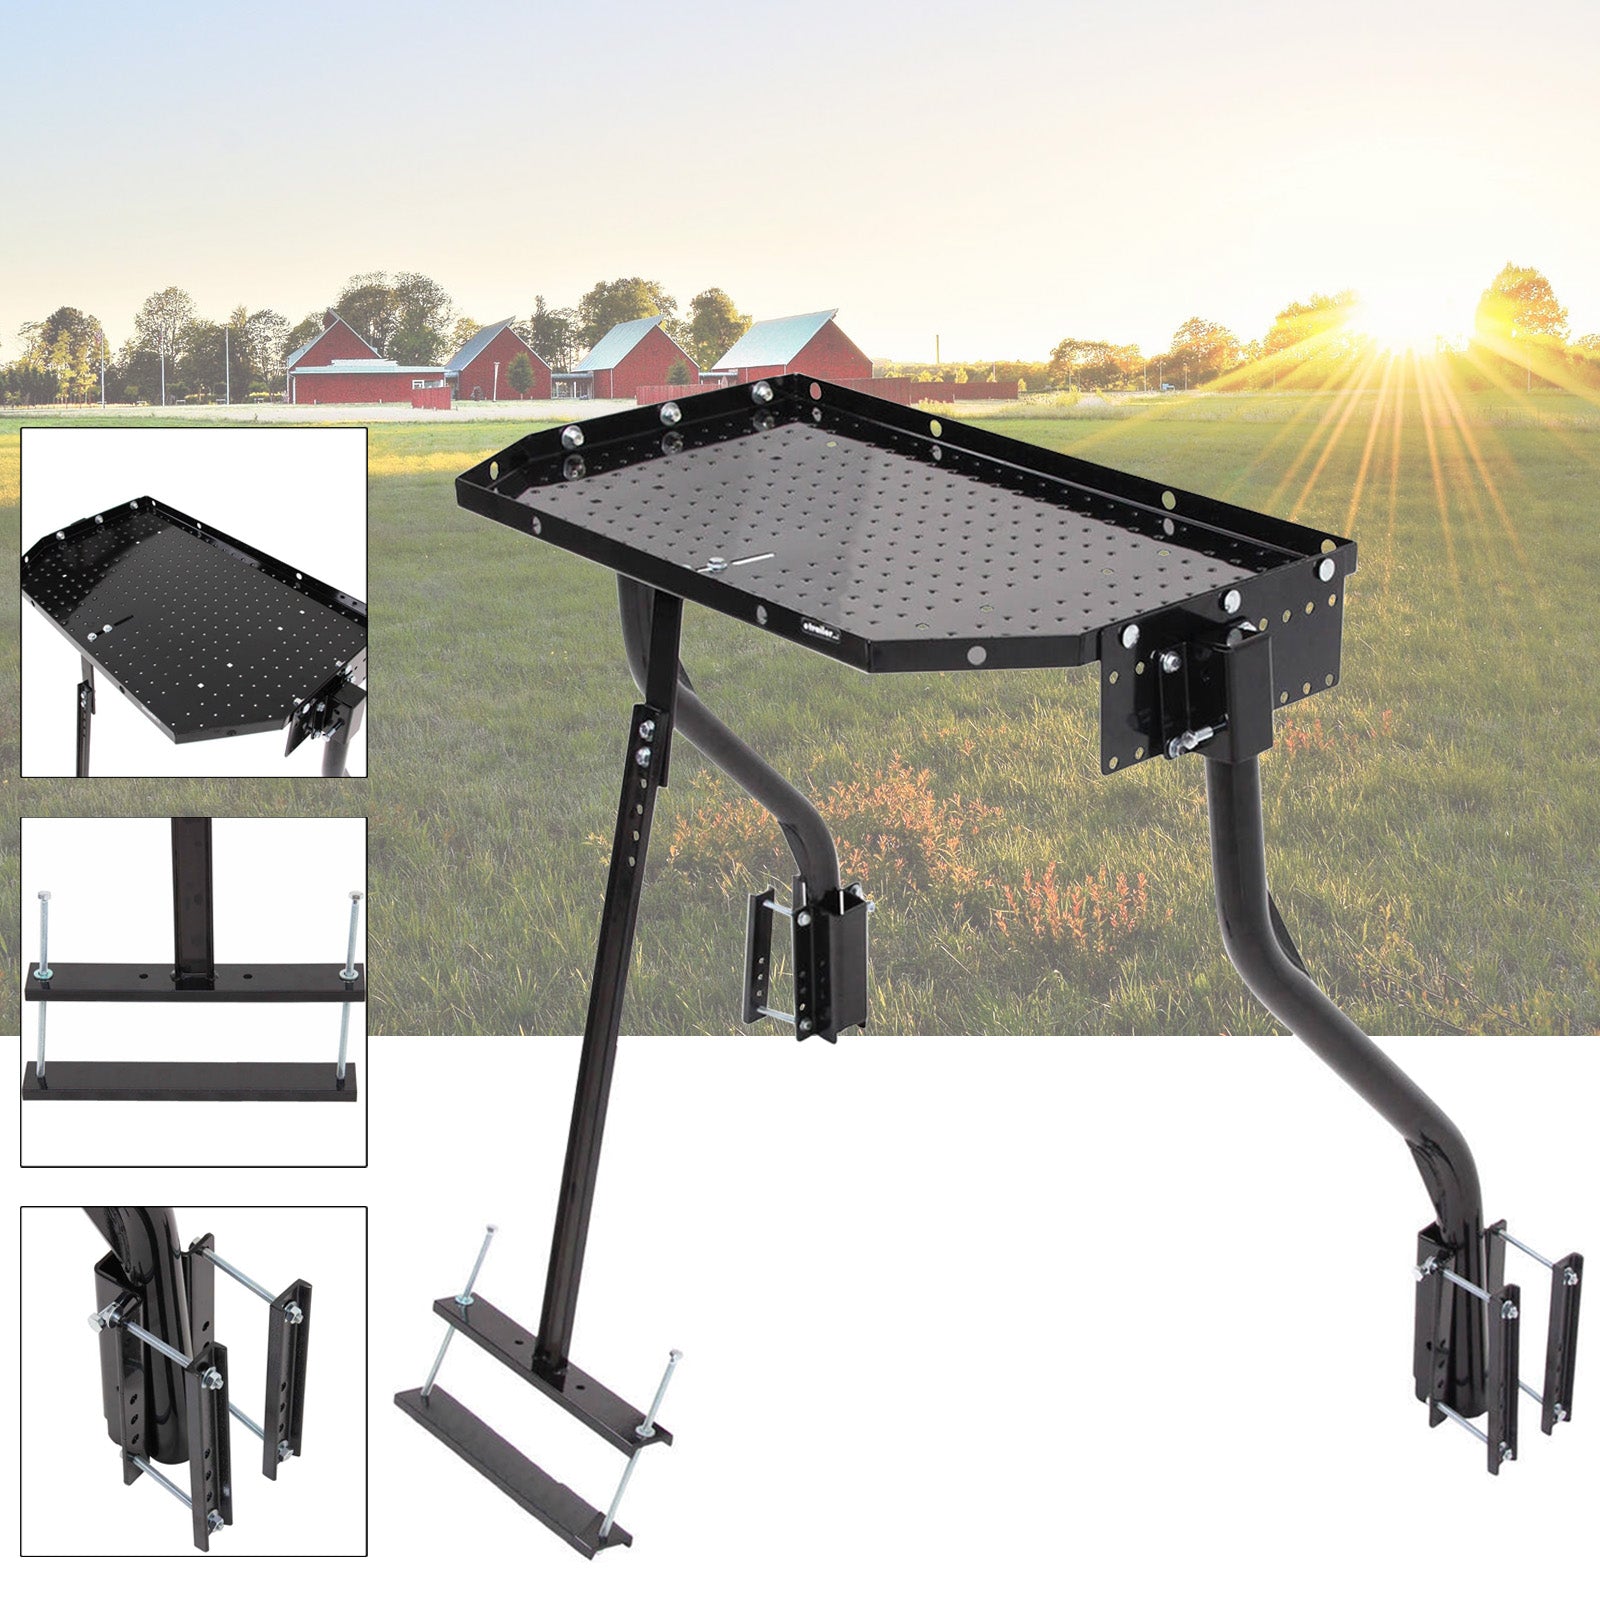 A-Frame Cargo Carrier For RV Trailer Tray For Outdoor and Generator Storage